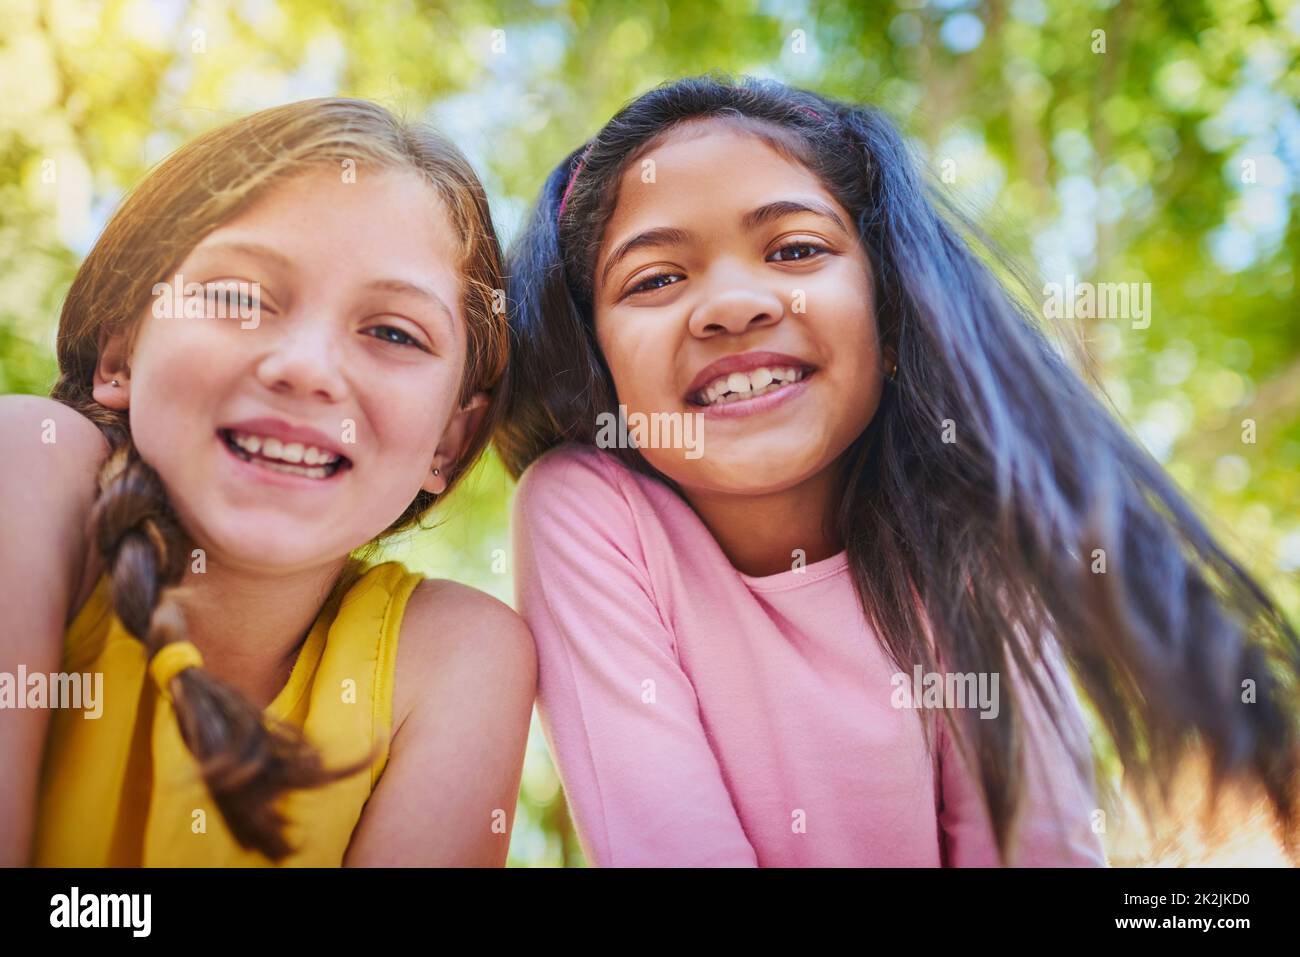 The best friend any girl could ask for. Shot of two adorable young girls outside. Stock Photo